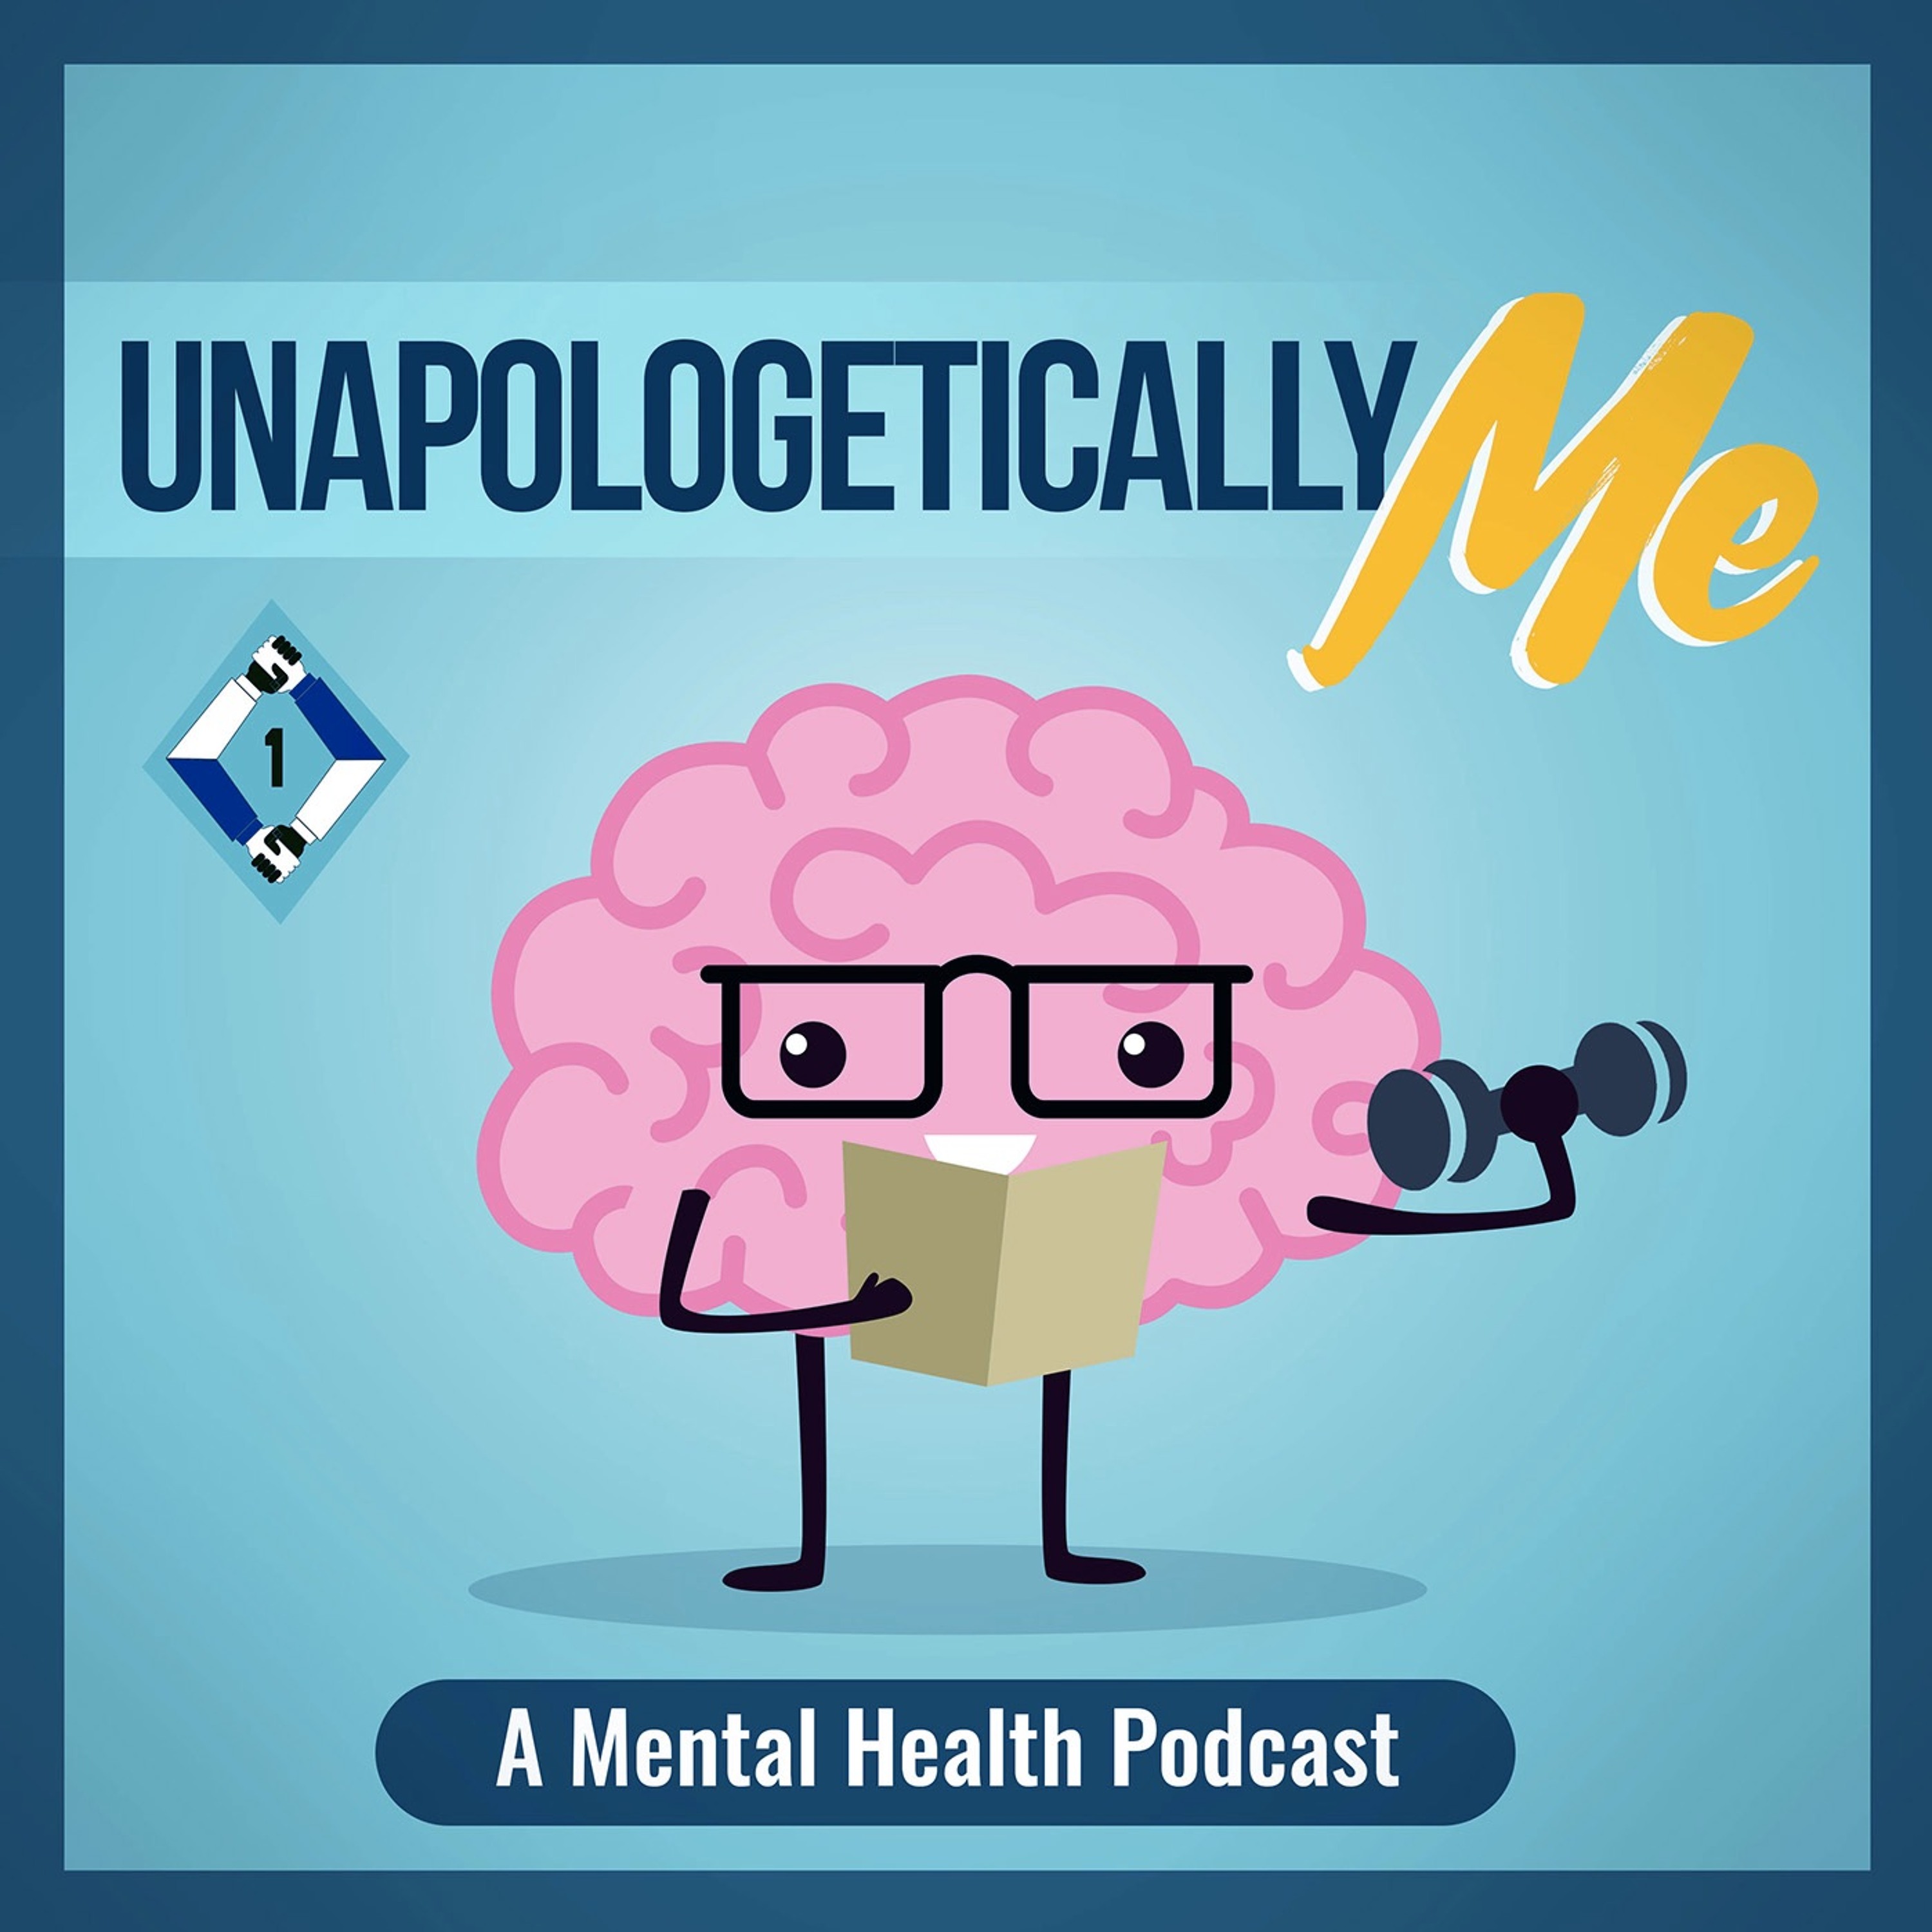 Unapologetically Me: A Mental Health Podcast - Finding Happy